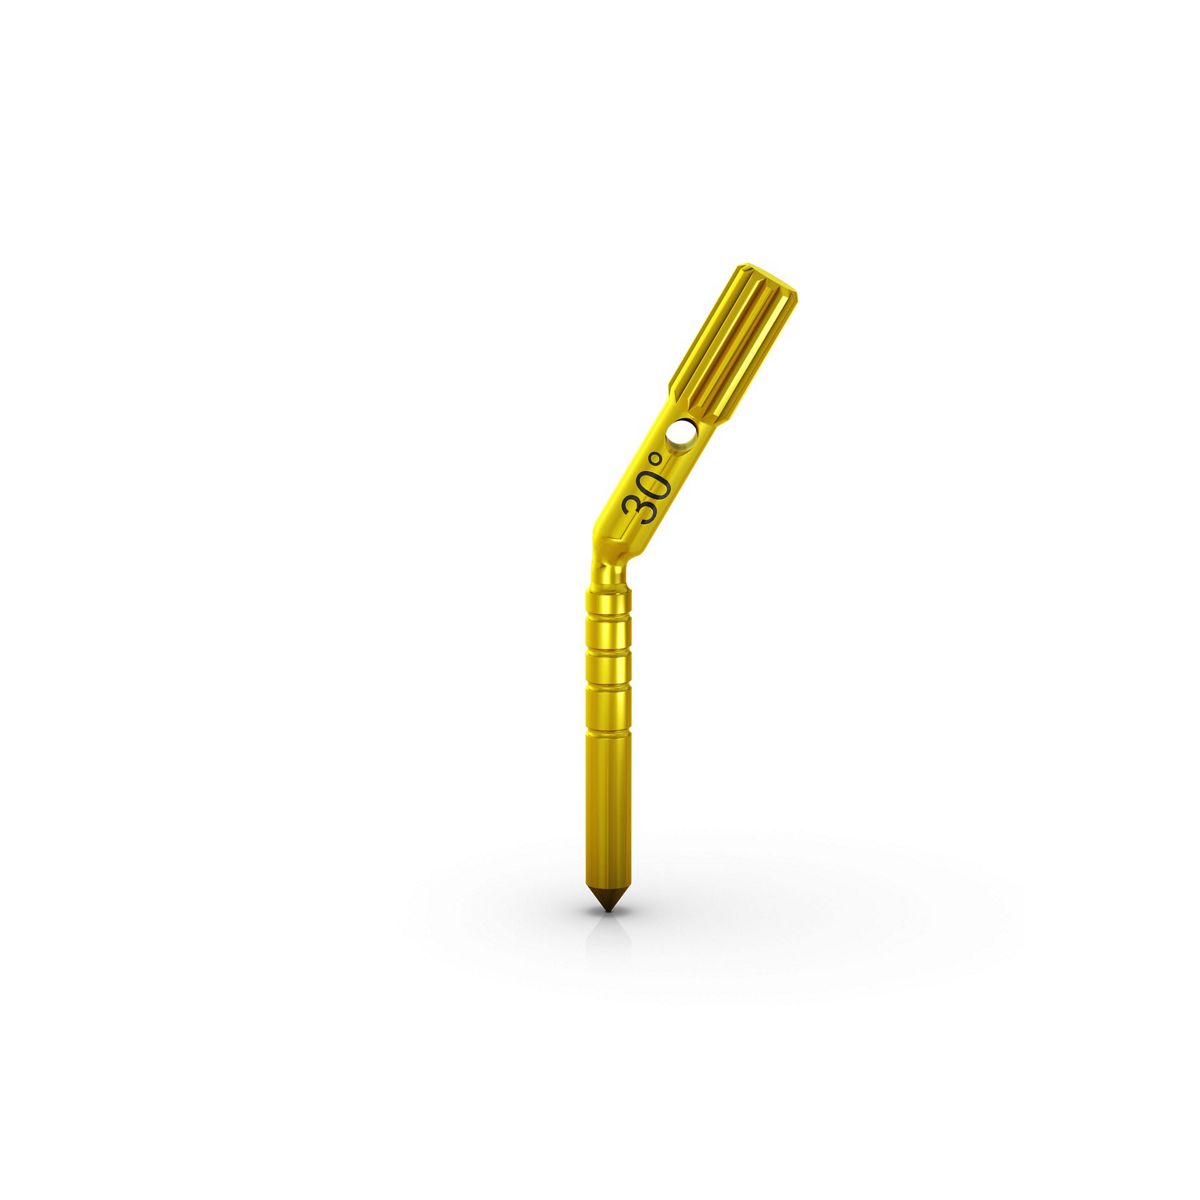 Angle Measurer 30 Degrees For Drill 2.0  Straumann Group - Neodent Global  Distributor